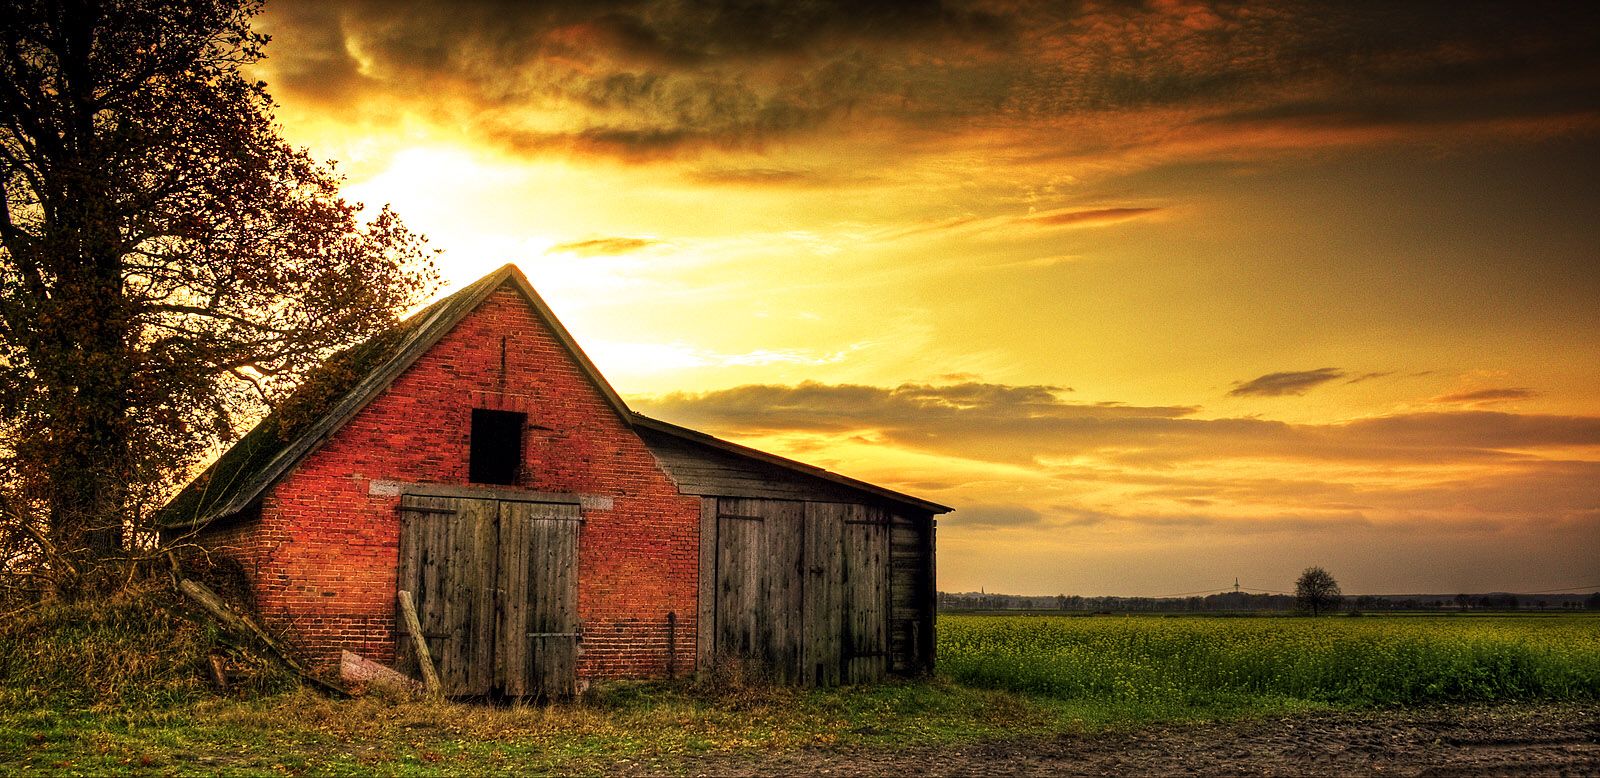 Landscapes With Old Barns - HD Wallpaper 